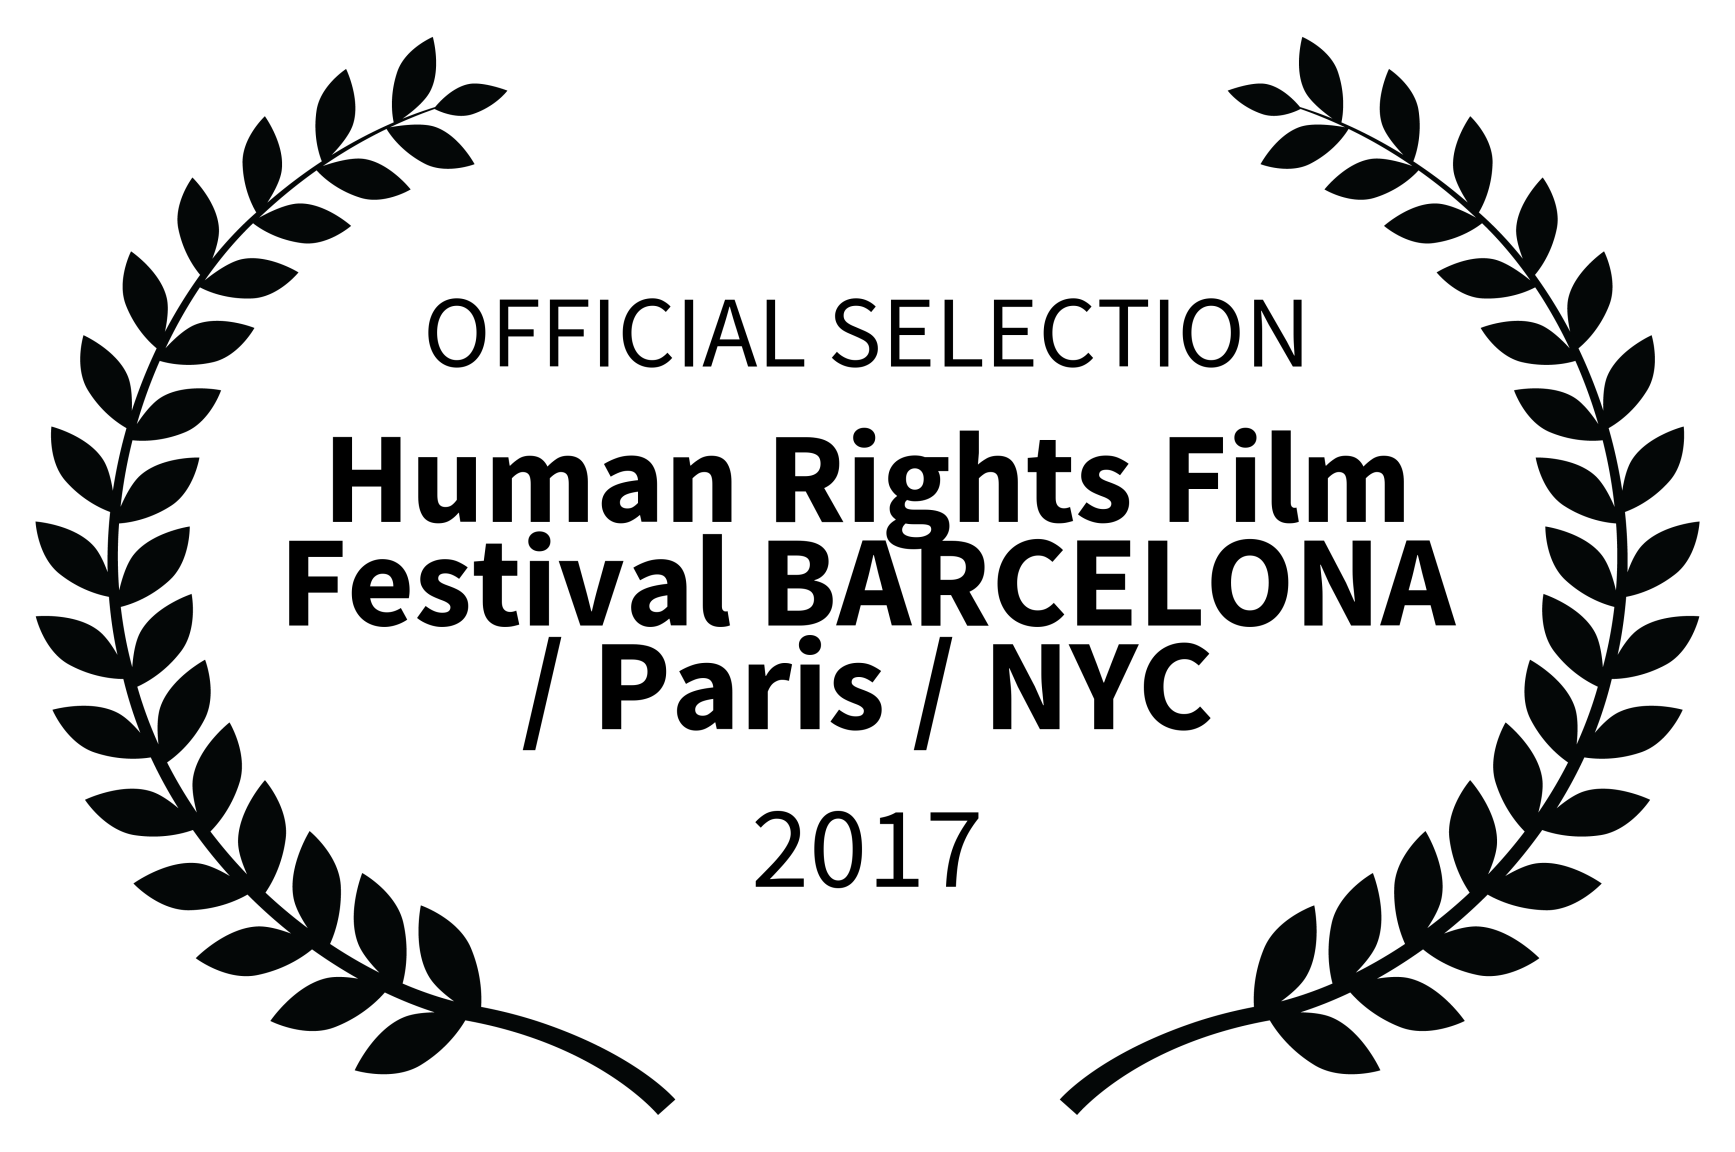 Laurel for Official Selection at Human Rights Film Festival BARCELONA Paris NYC awarded to 'L'estoc' in 2017